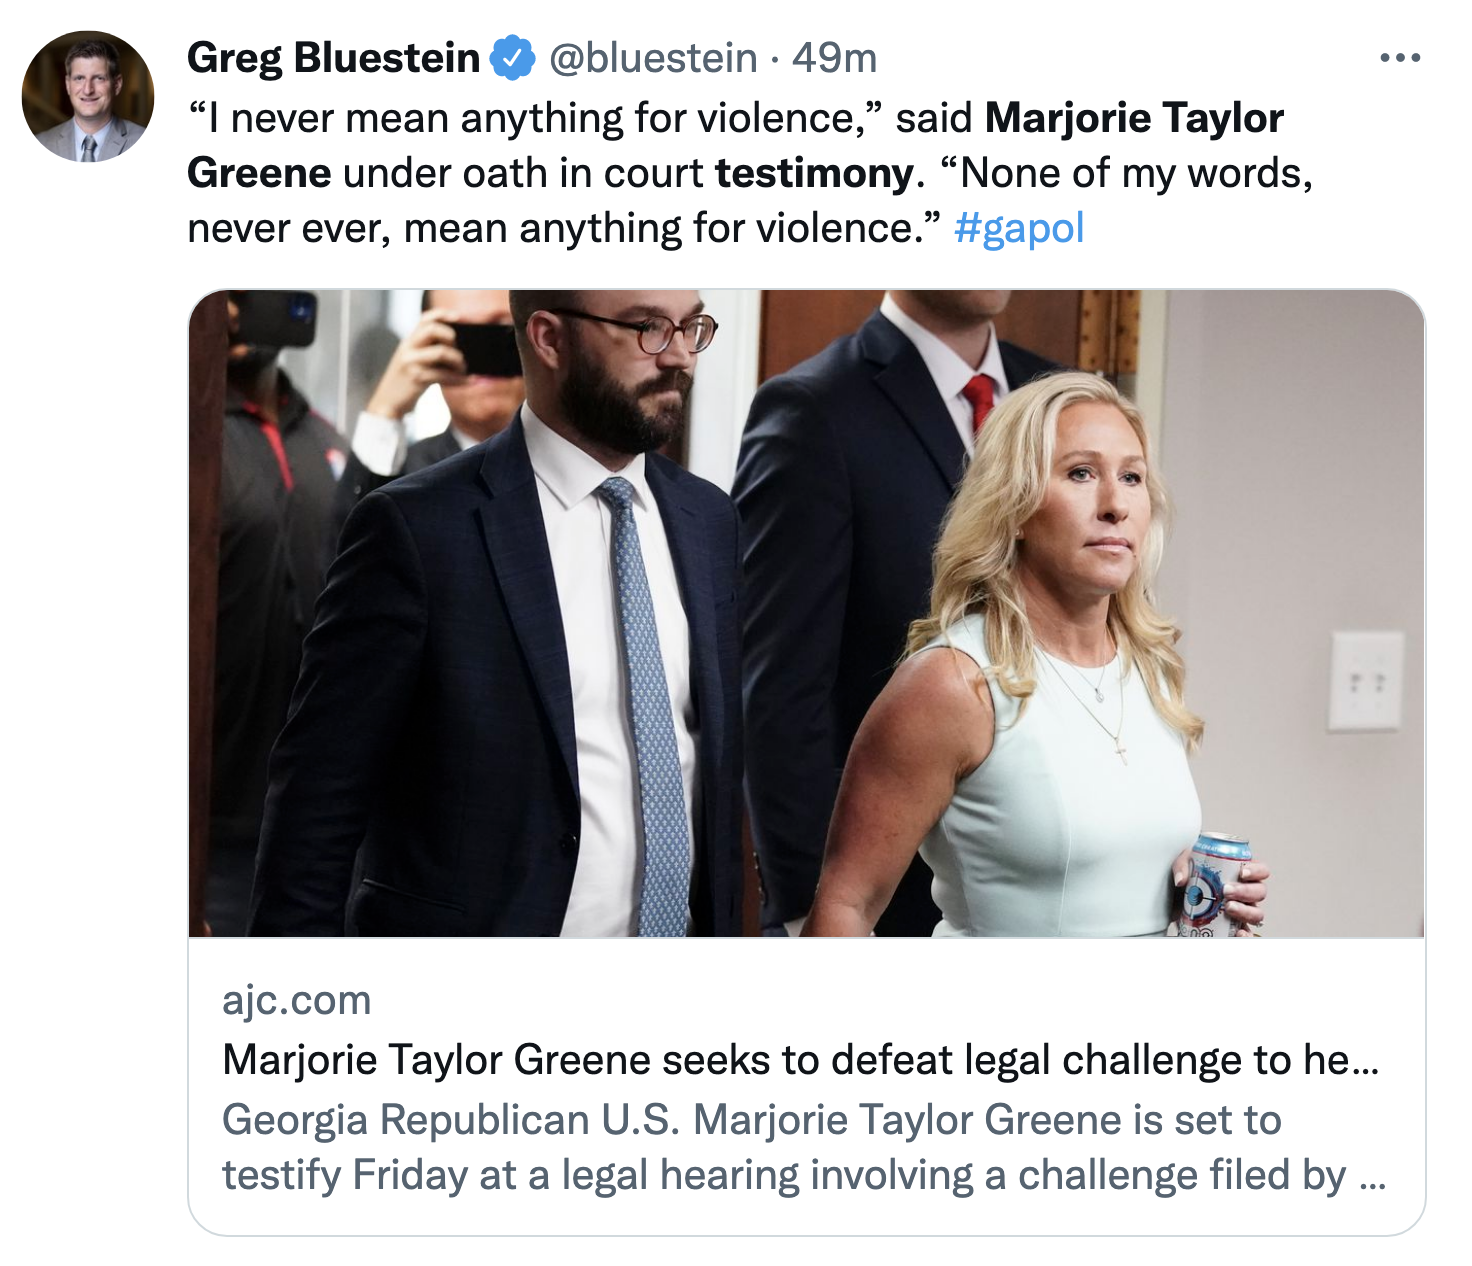 Screen-Shot-2022-04-22-at-11.59.55-AM Marjorie Greene Has Disastrous Court Appearance Under Oath Crime Featured Politics Social Media Top Stories 